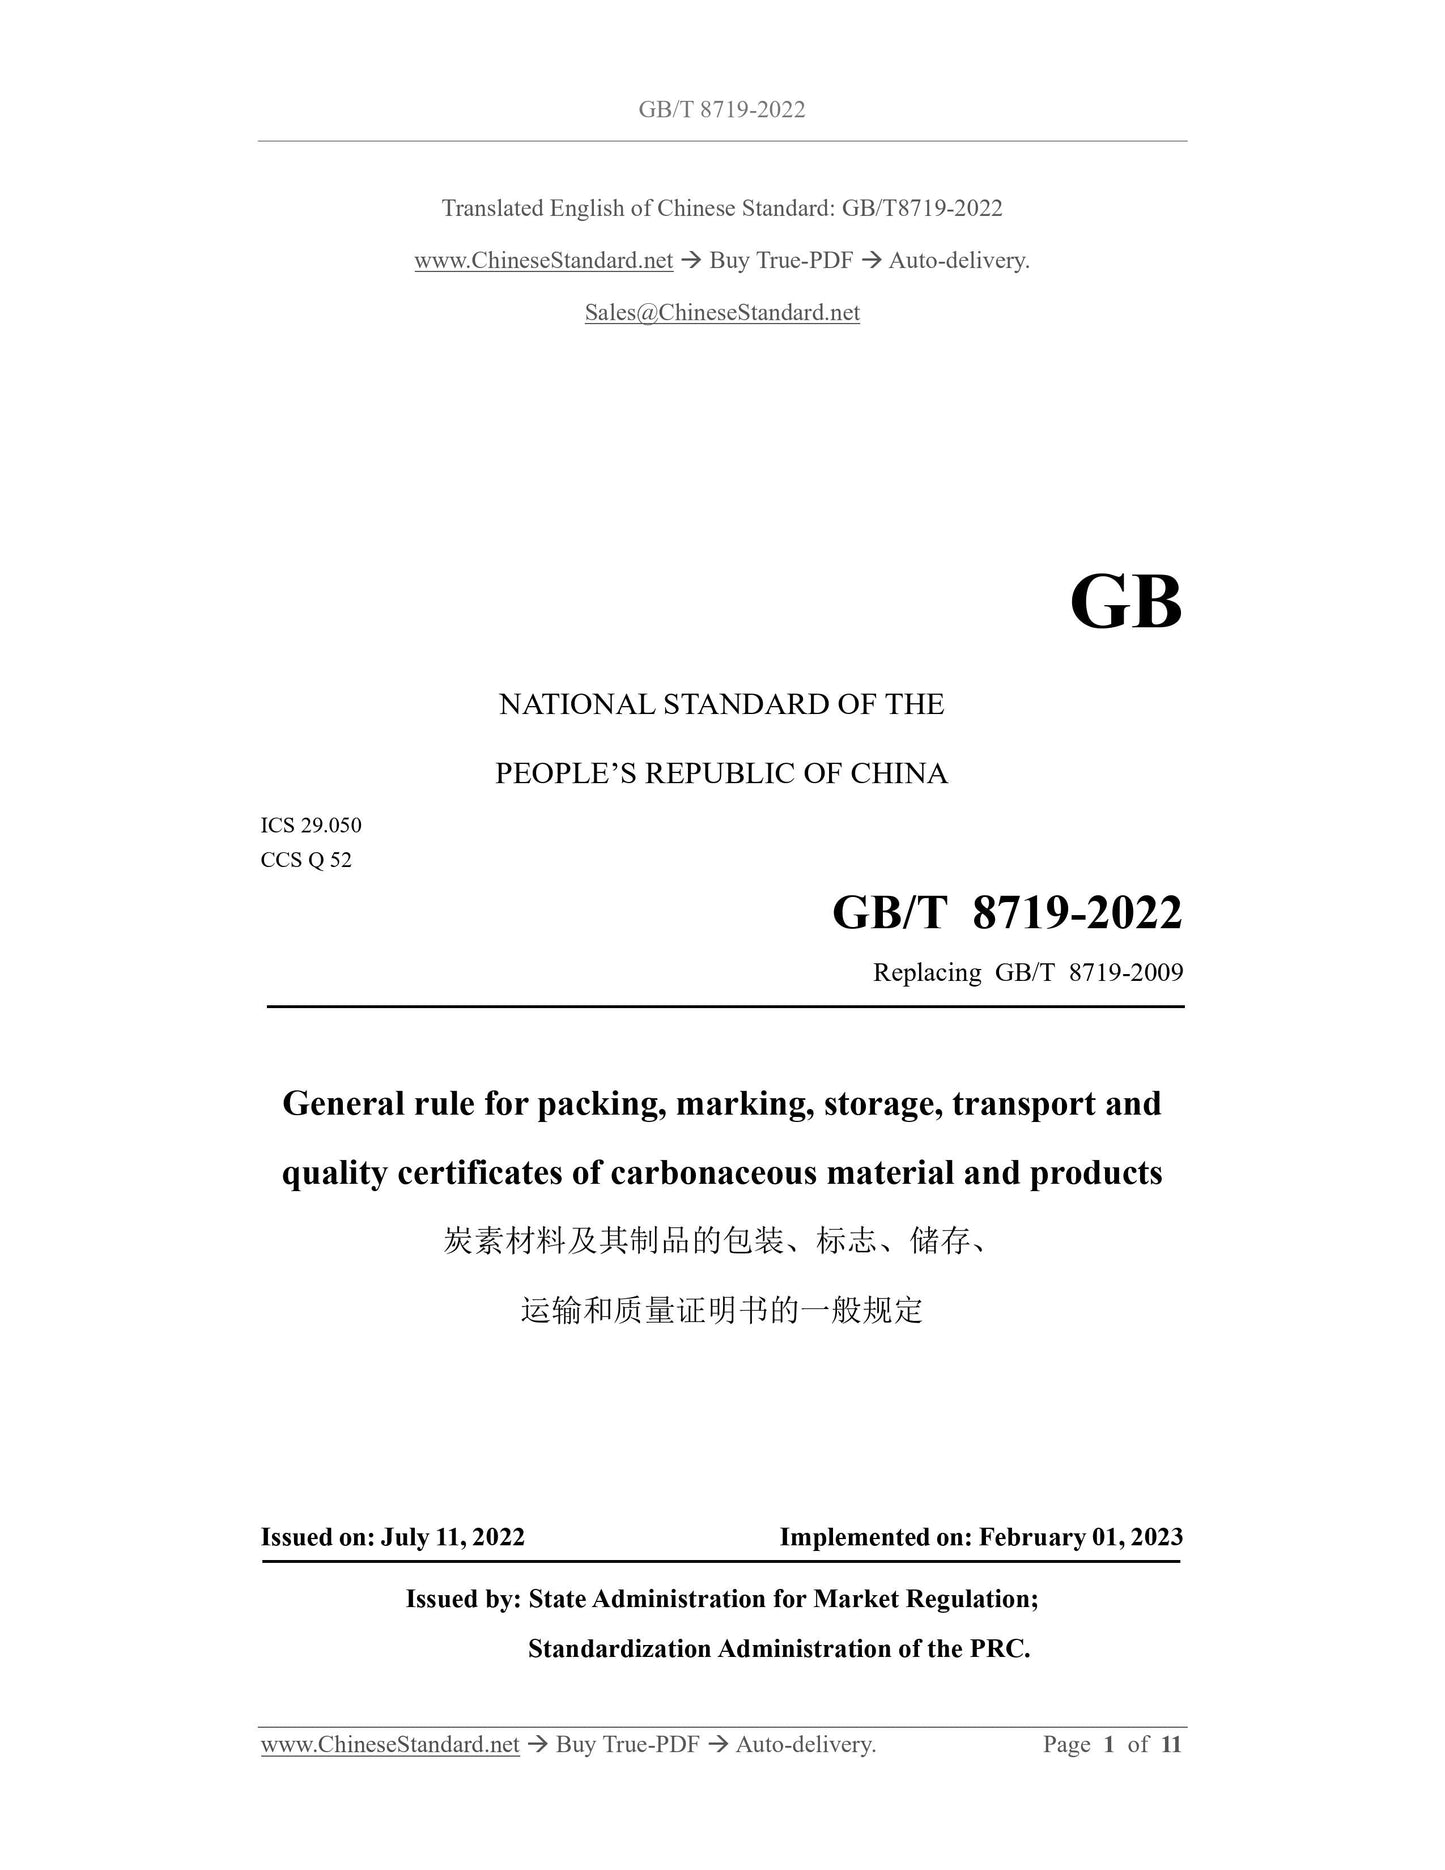 GB/T 8719-2022 Page 1